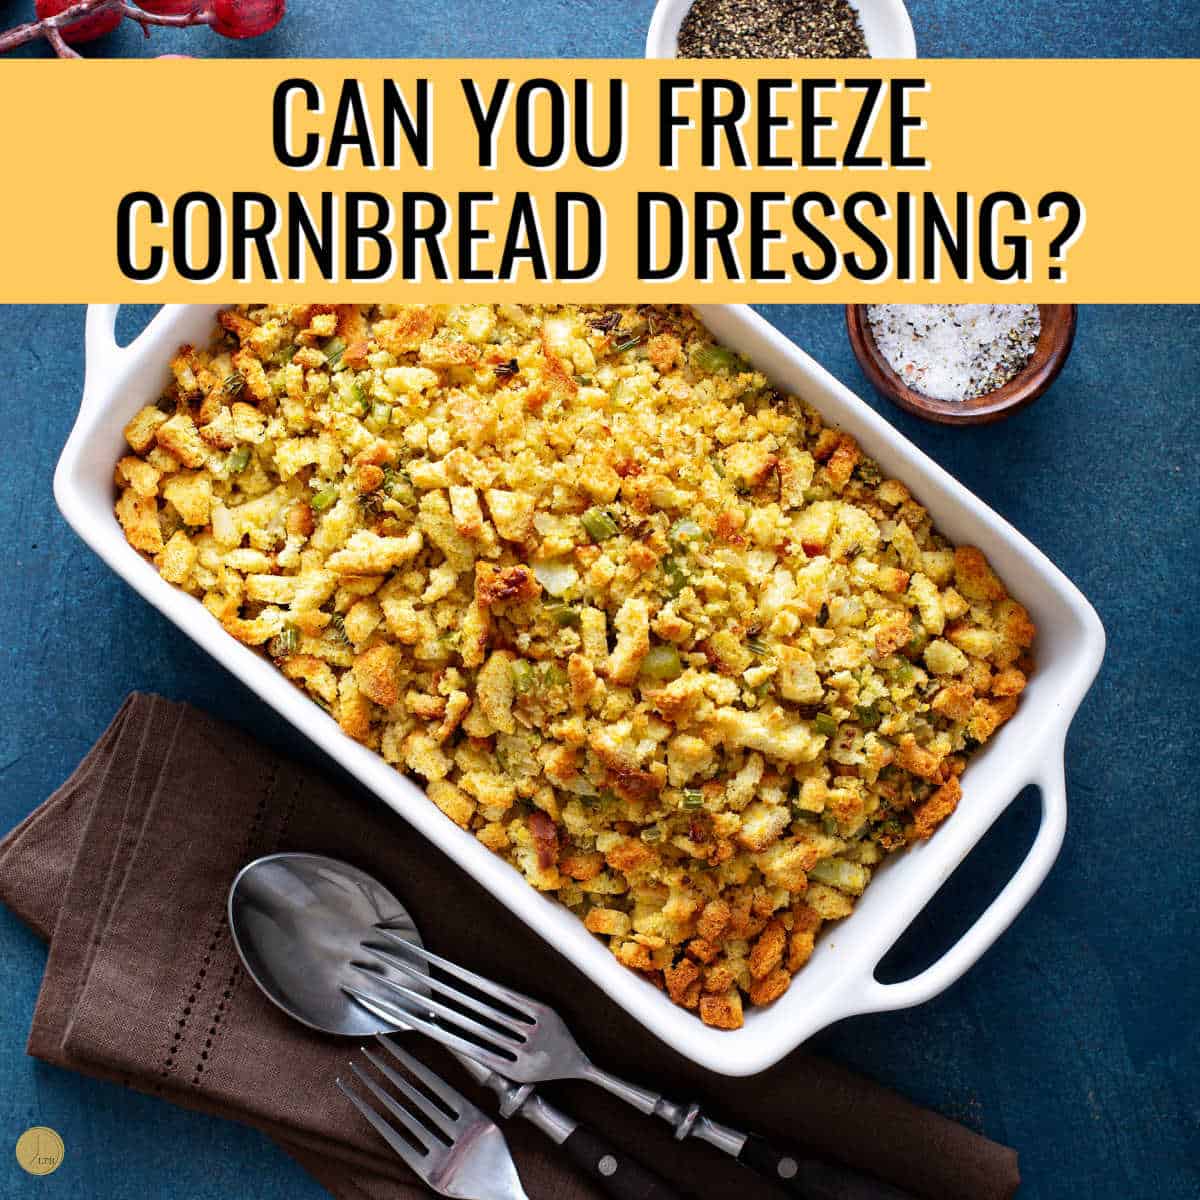 cornbread dressing in white dish with text in yellow banner